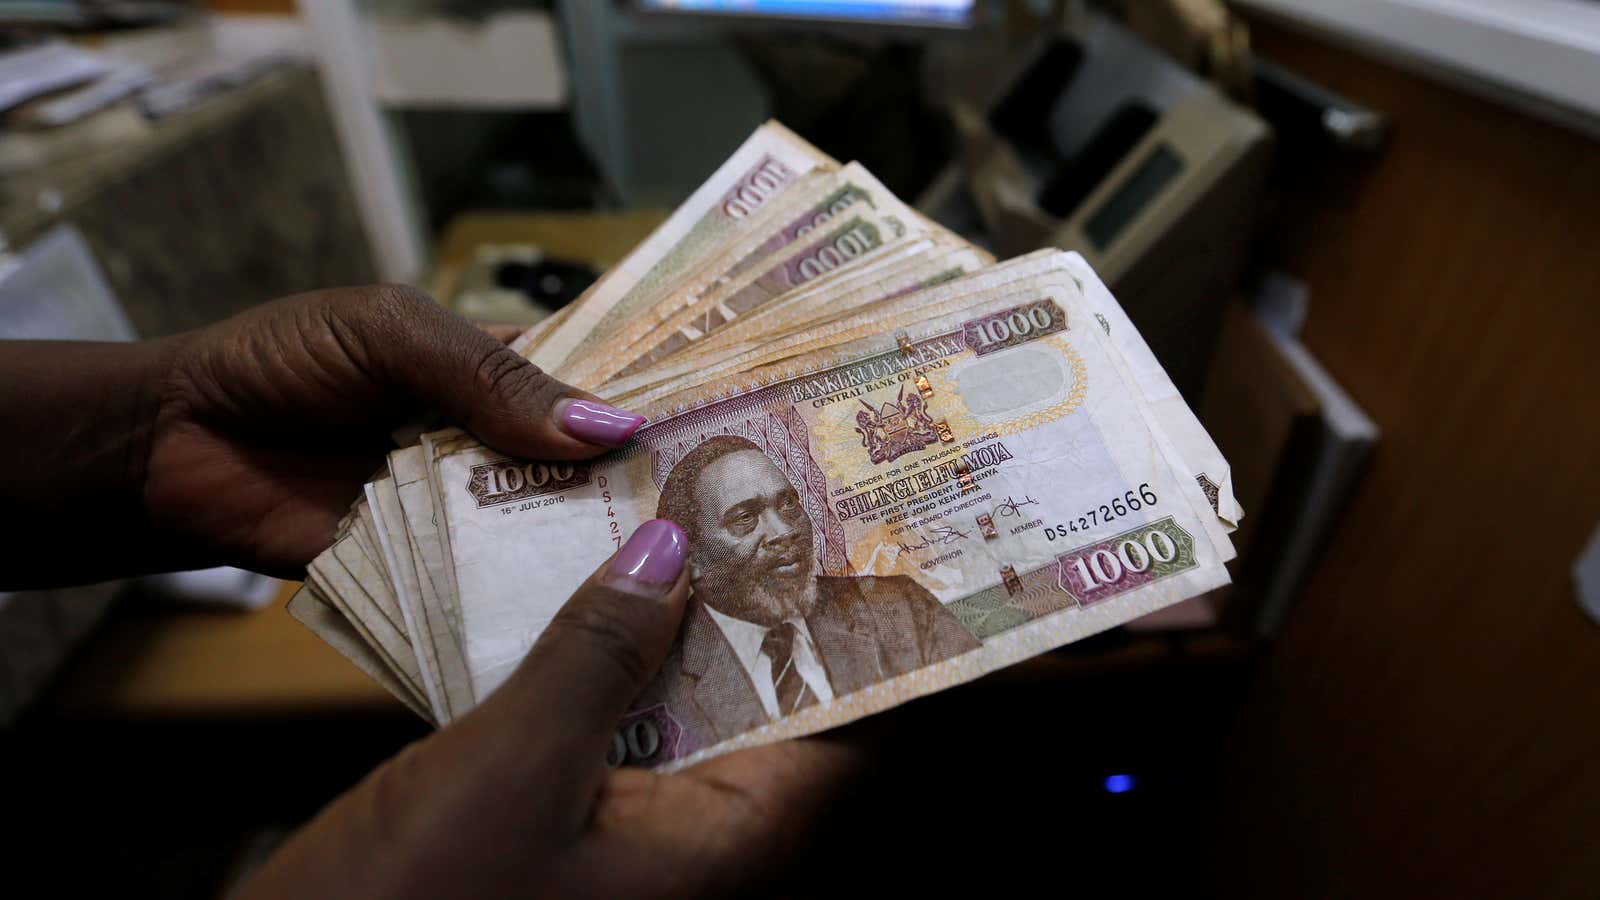 On average, the Kenyan government needs $434 million to pay salaries and pension every month.